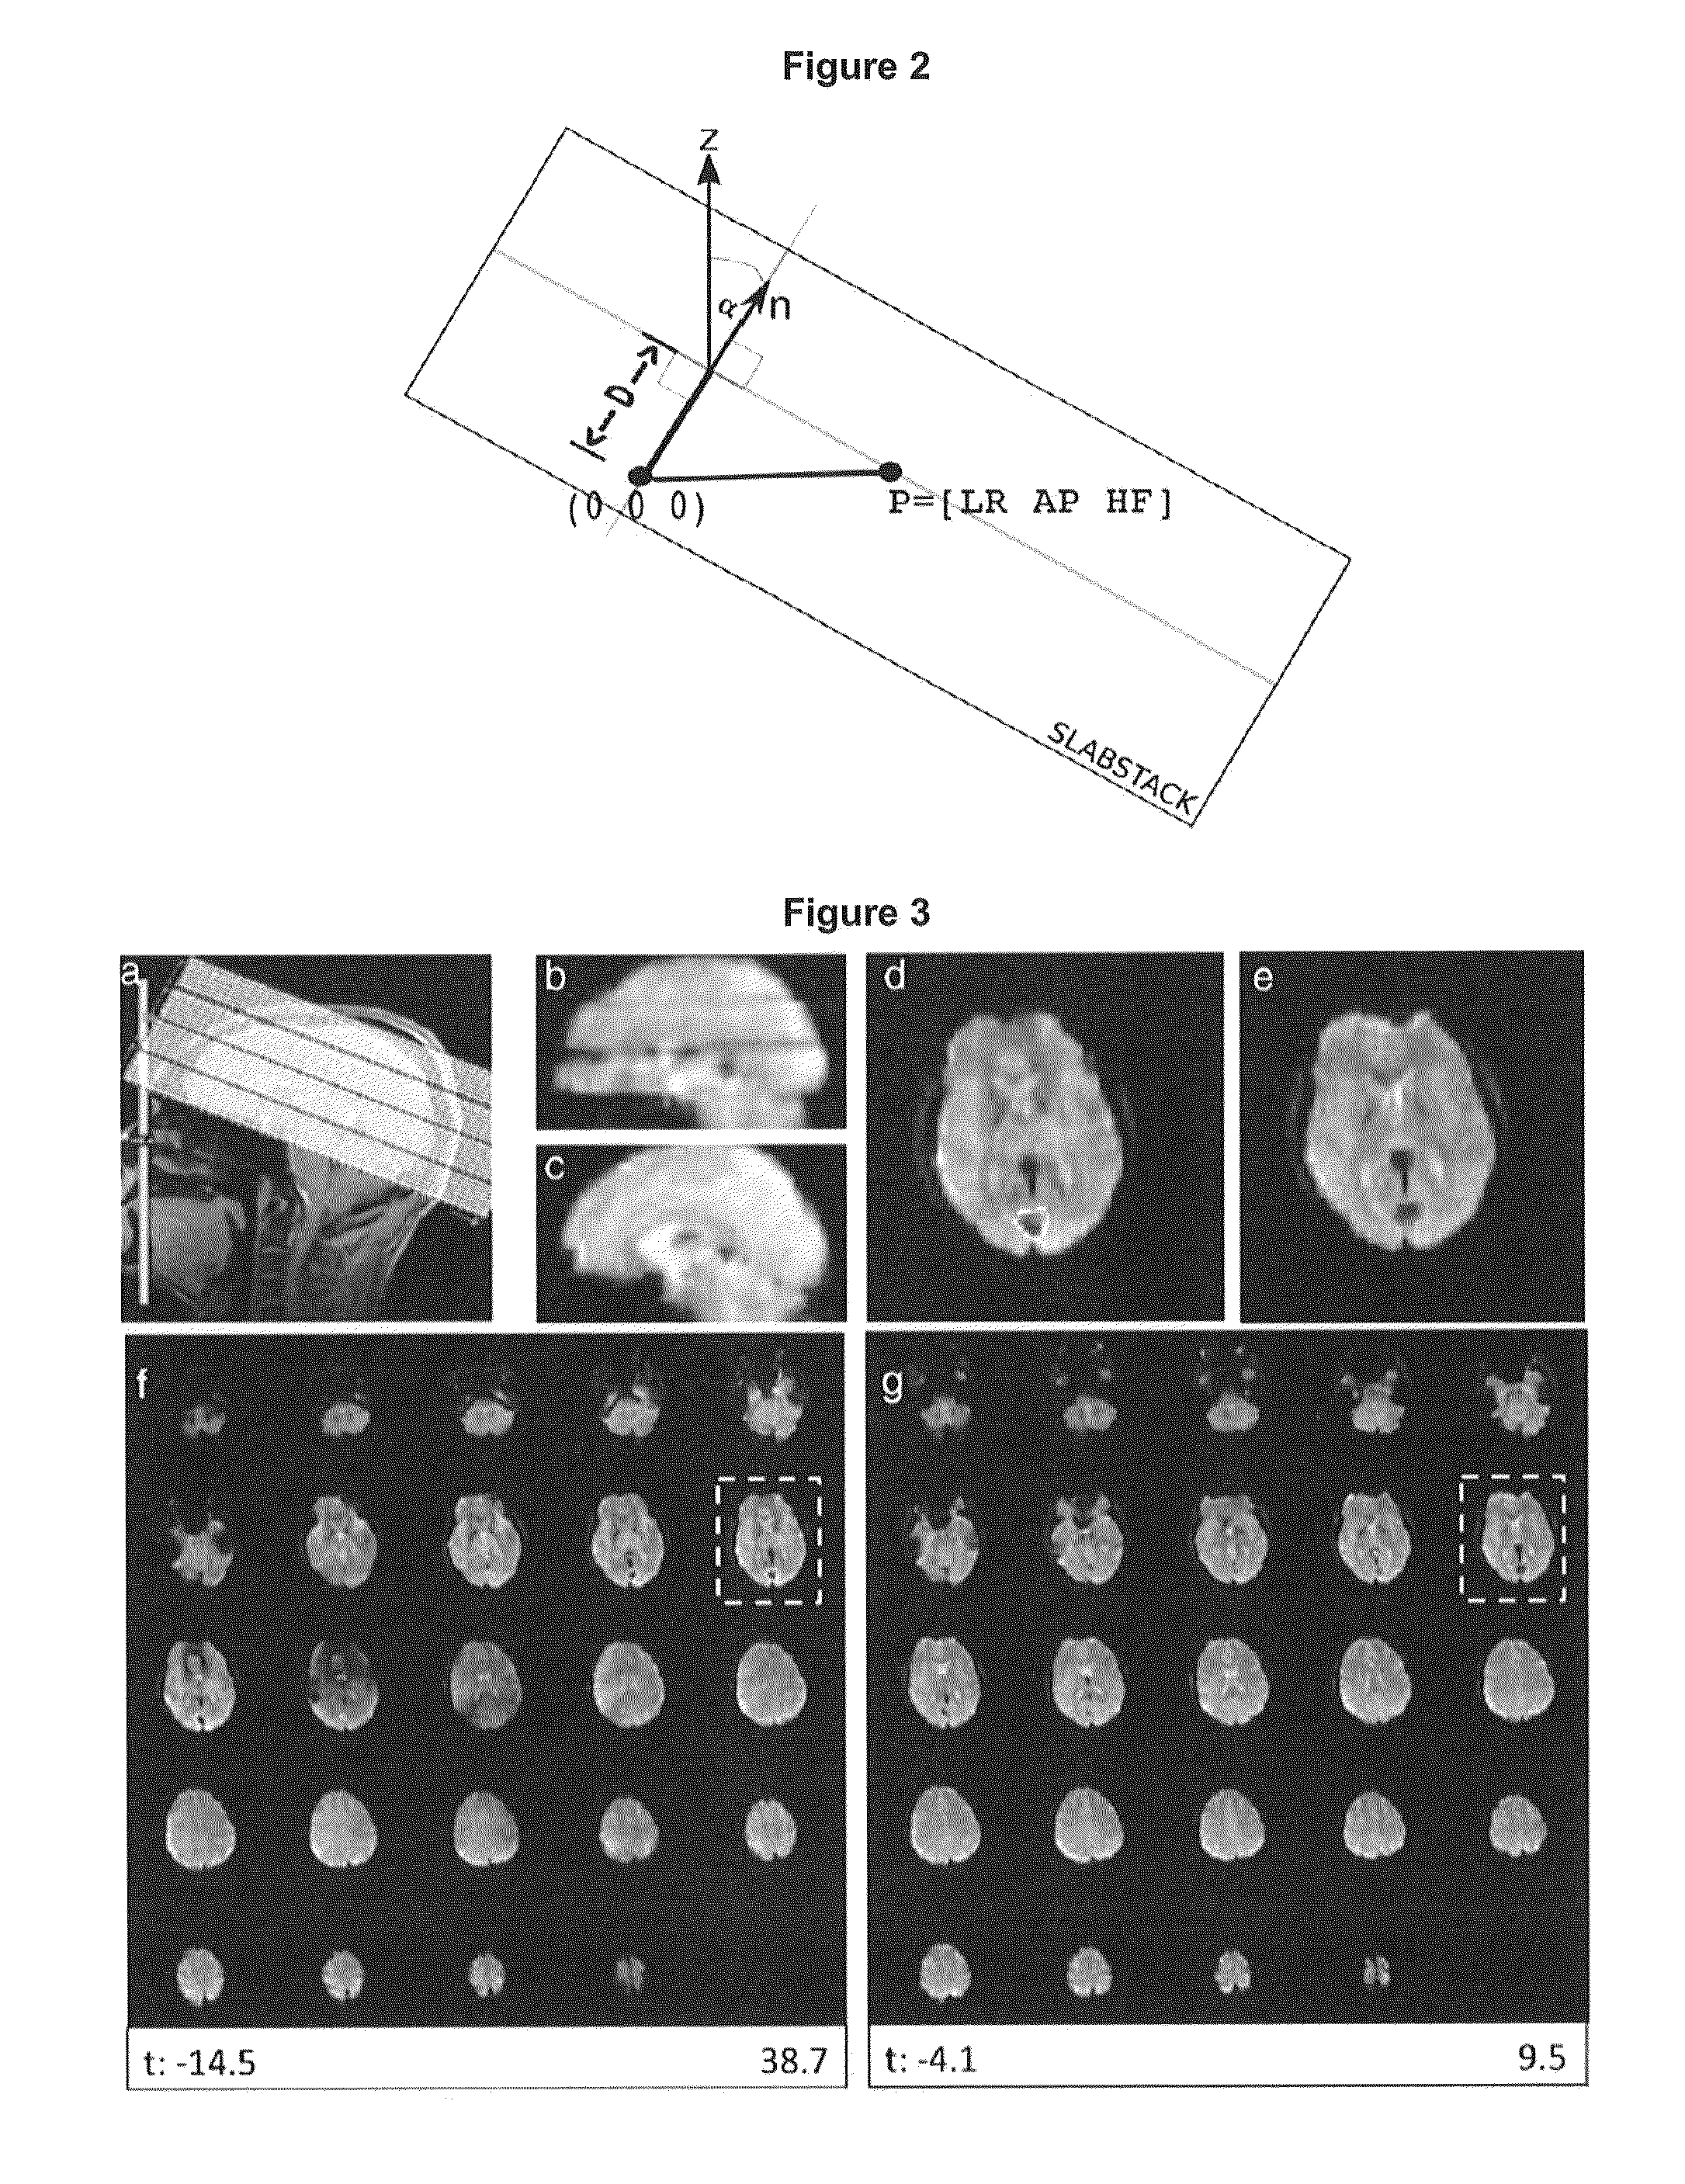 System and methods for improved real time functional magnetic resonance imaging